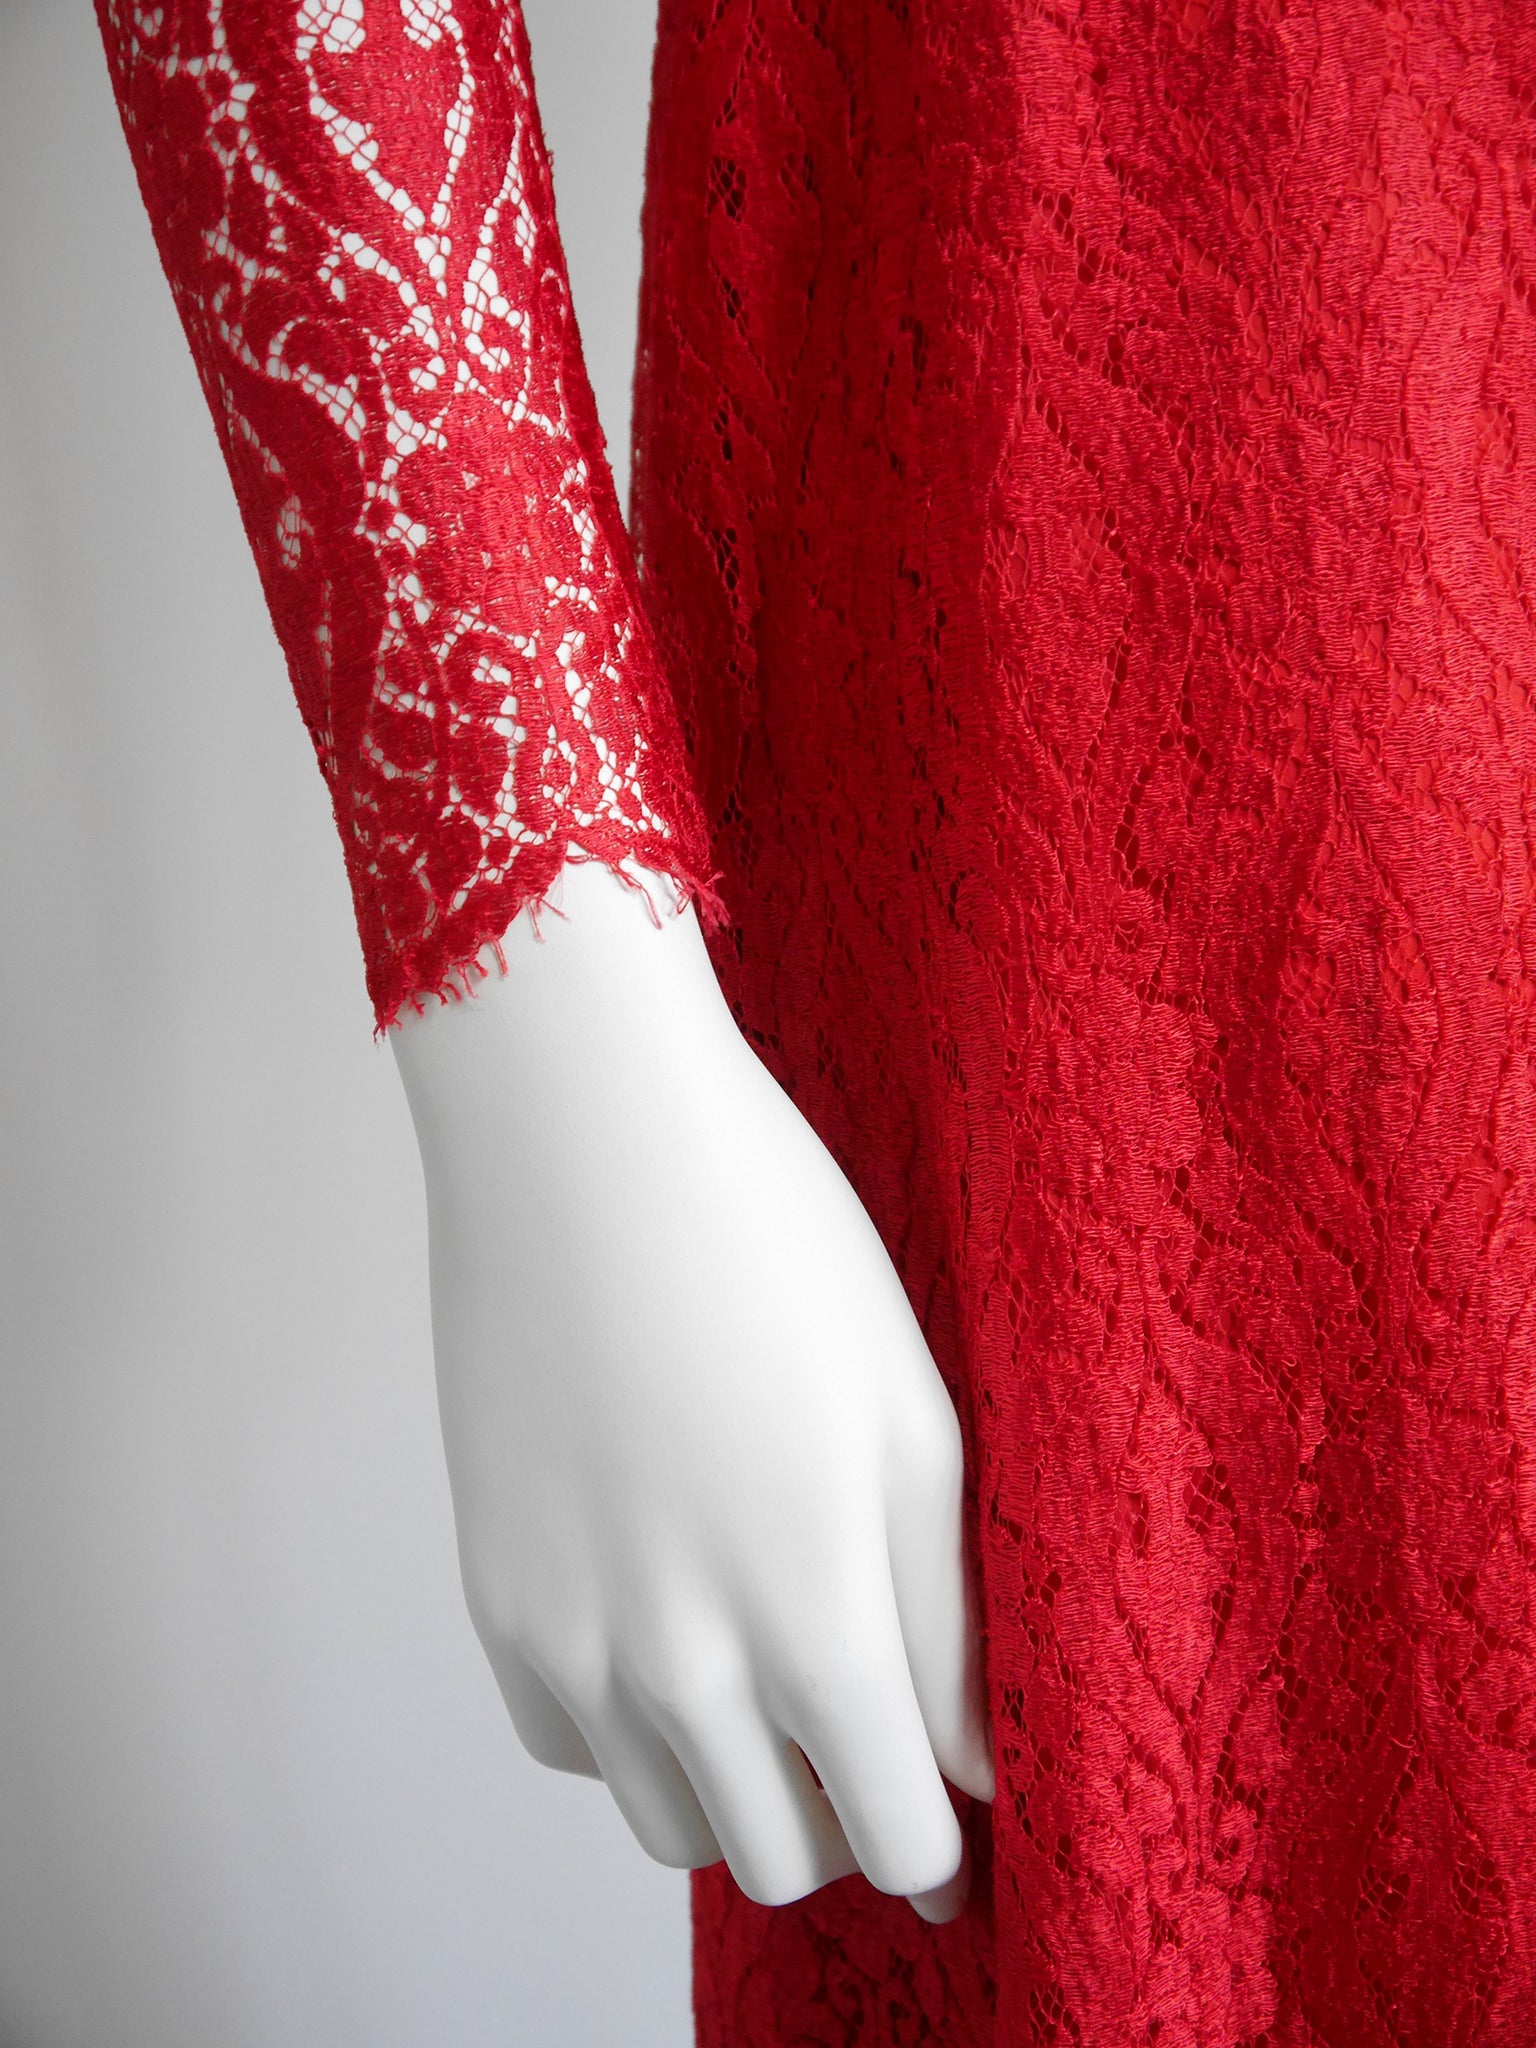 MISS DIOR by Christian Dior c. 1970 Vintage Red Lace Maxi Evening Gown Size S